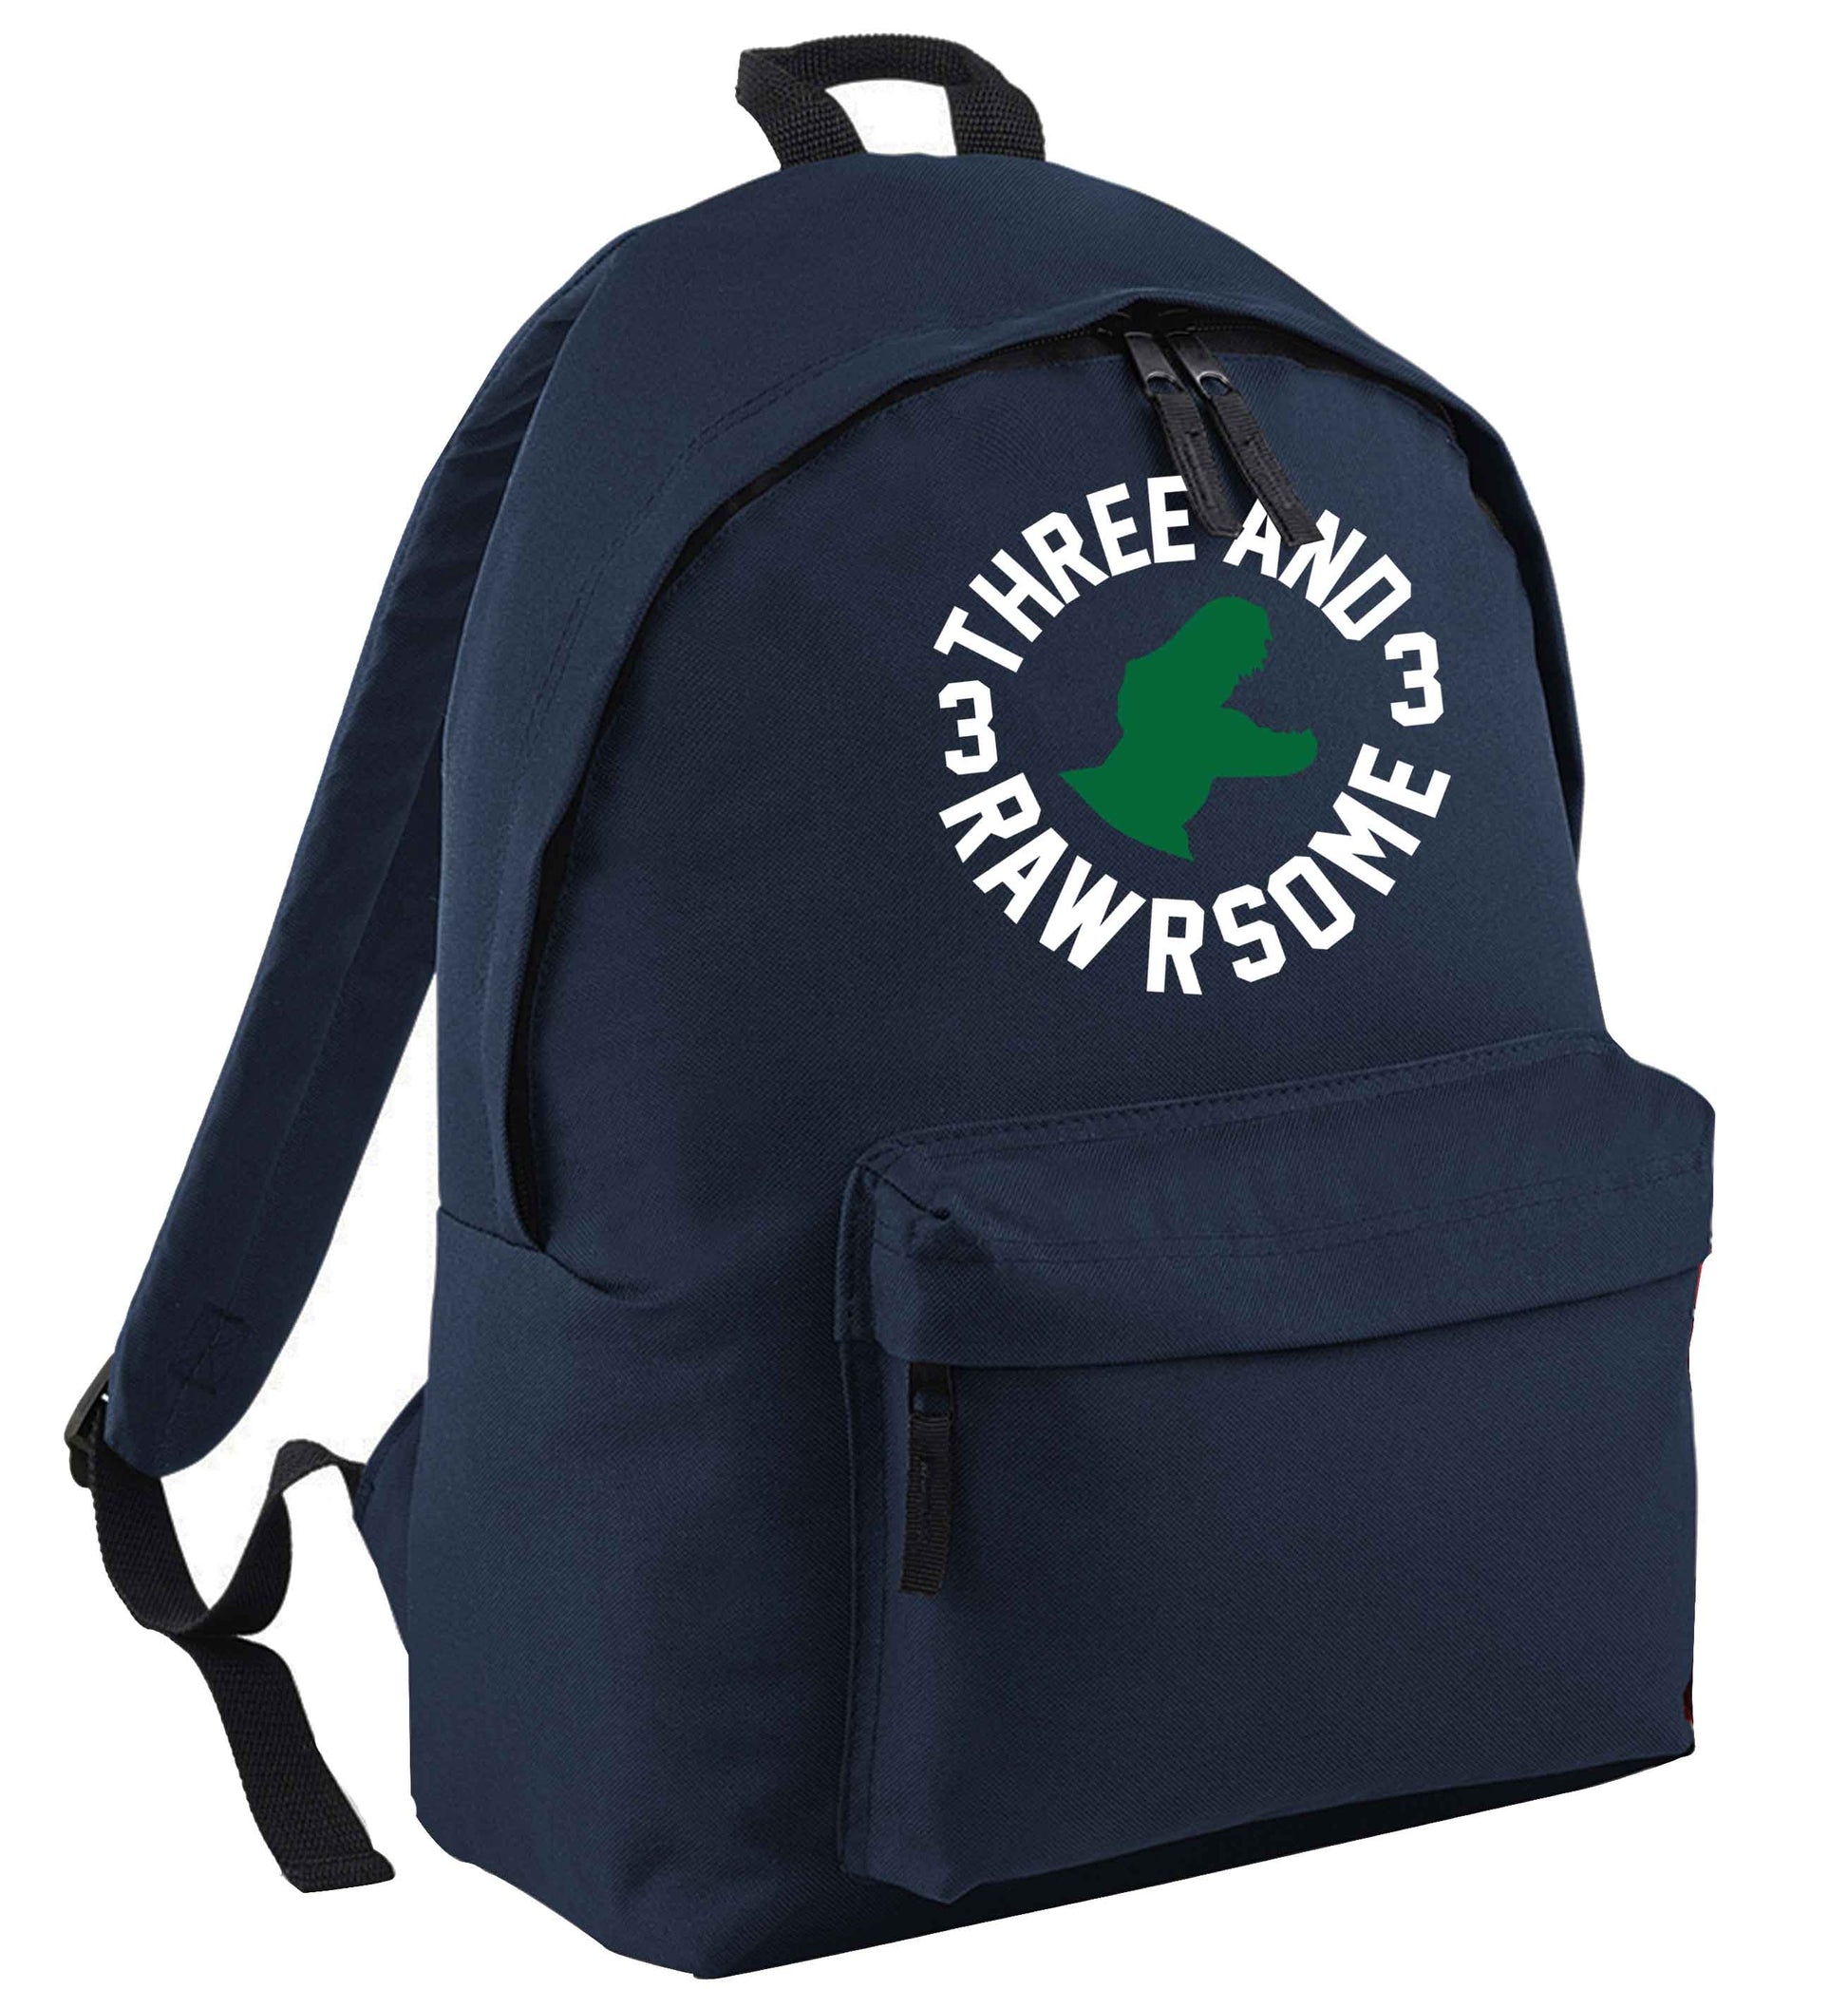 Three and rawrsome navy adults backpack